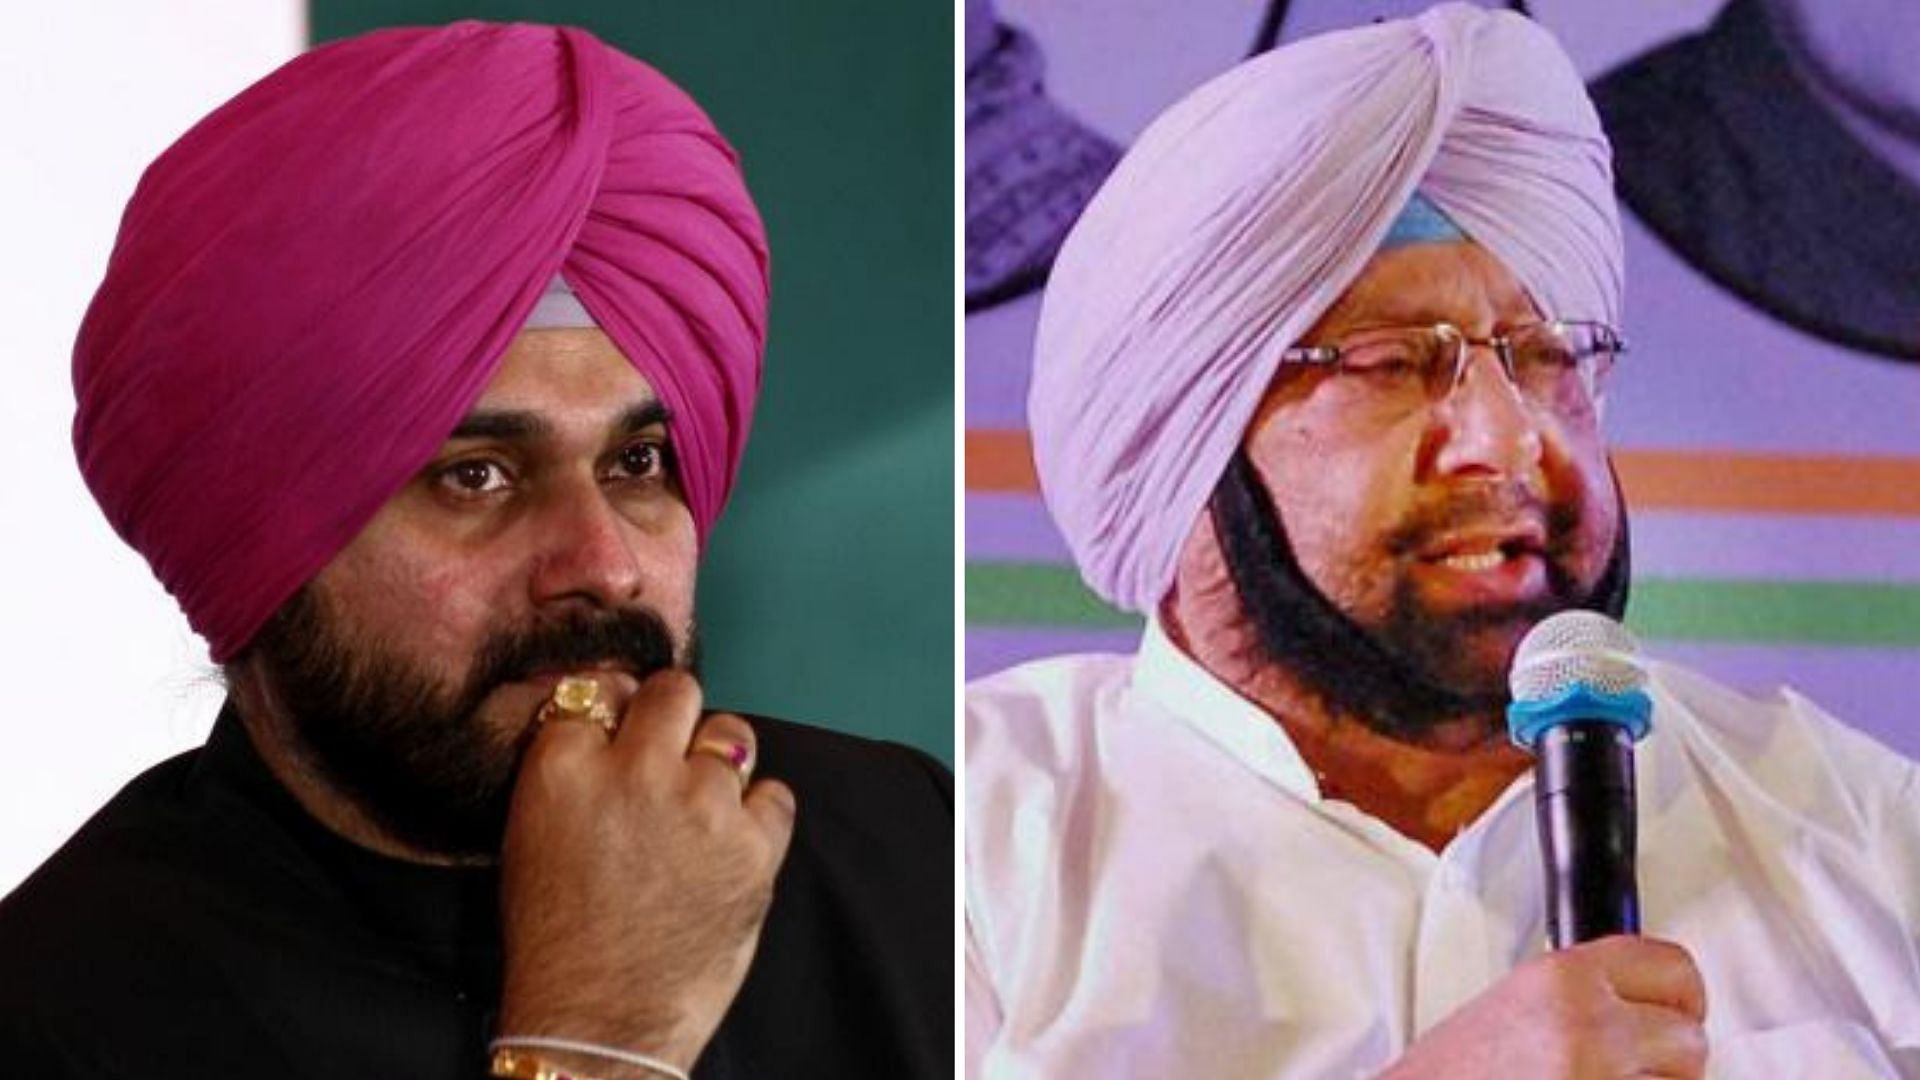 Sidhu was removed from his earlier portfolios and given two new ones, in the midst of a widening split between Sidhu and Punjab CM Amarinder Singh.